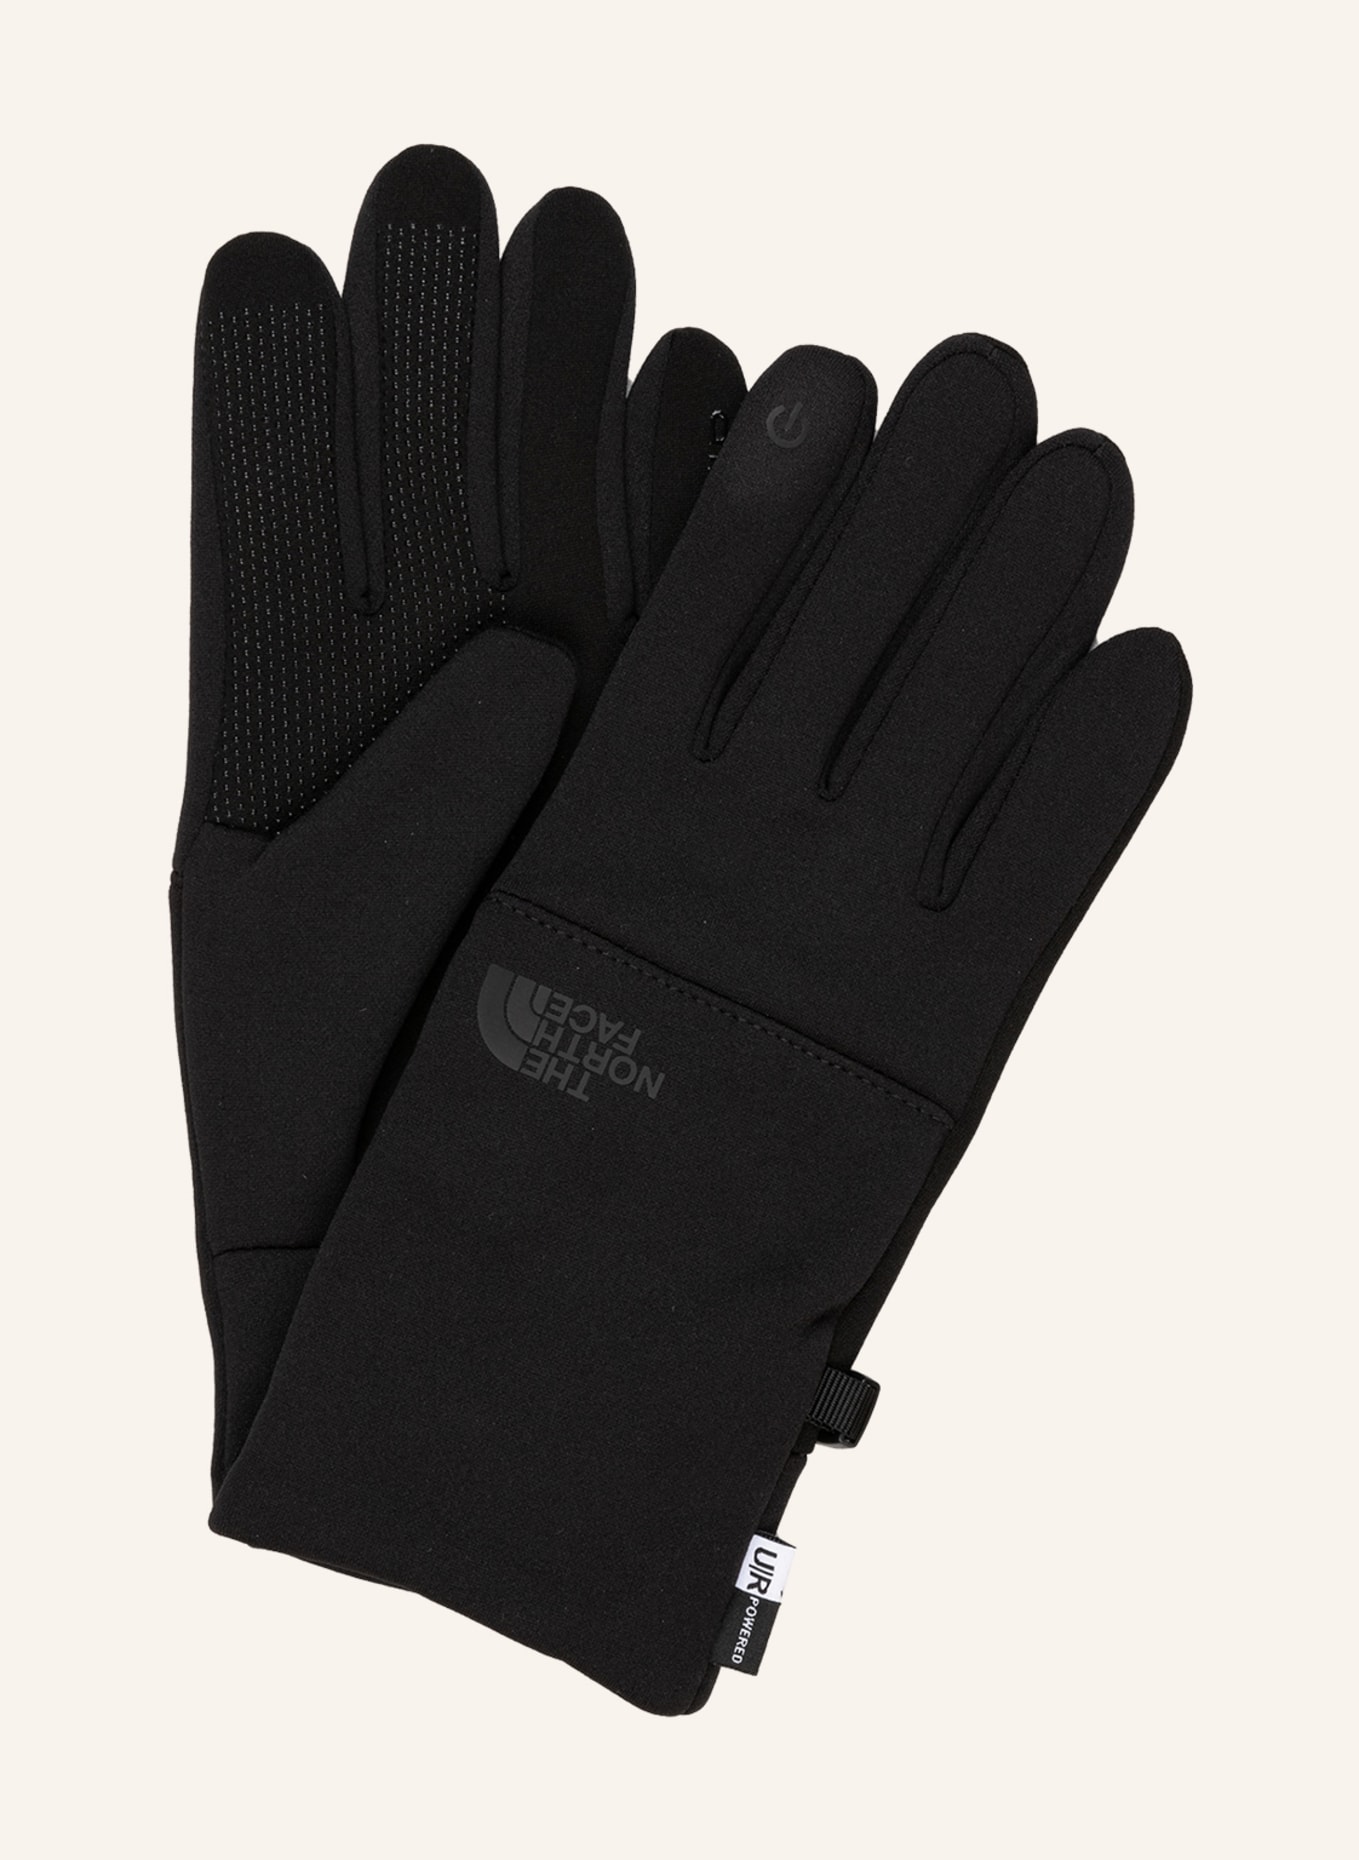 THE NORTH FACE Multisport touchscreen gloves in function ETIP black with